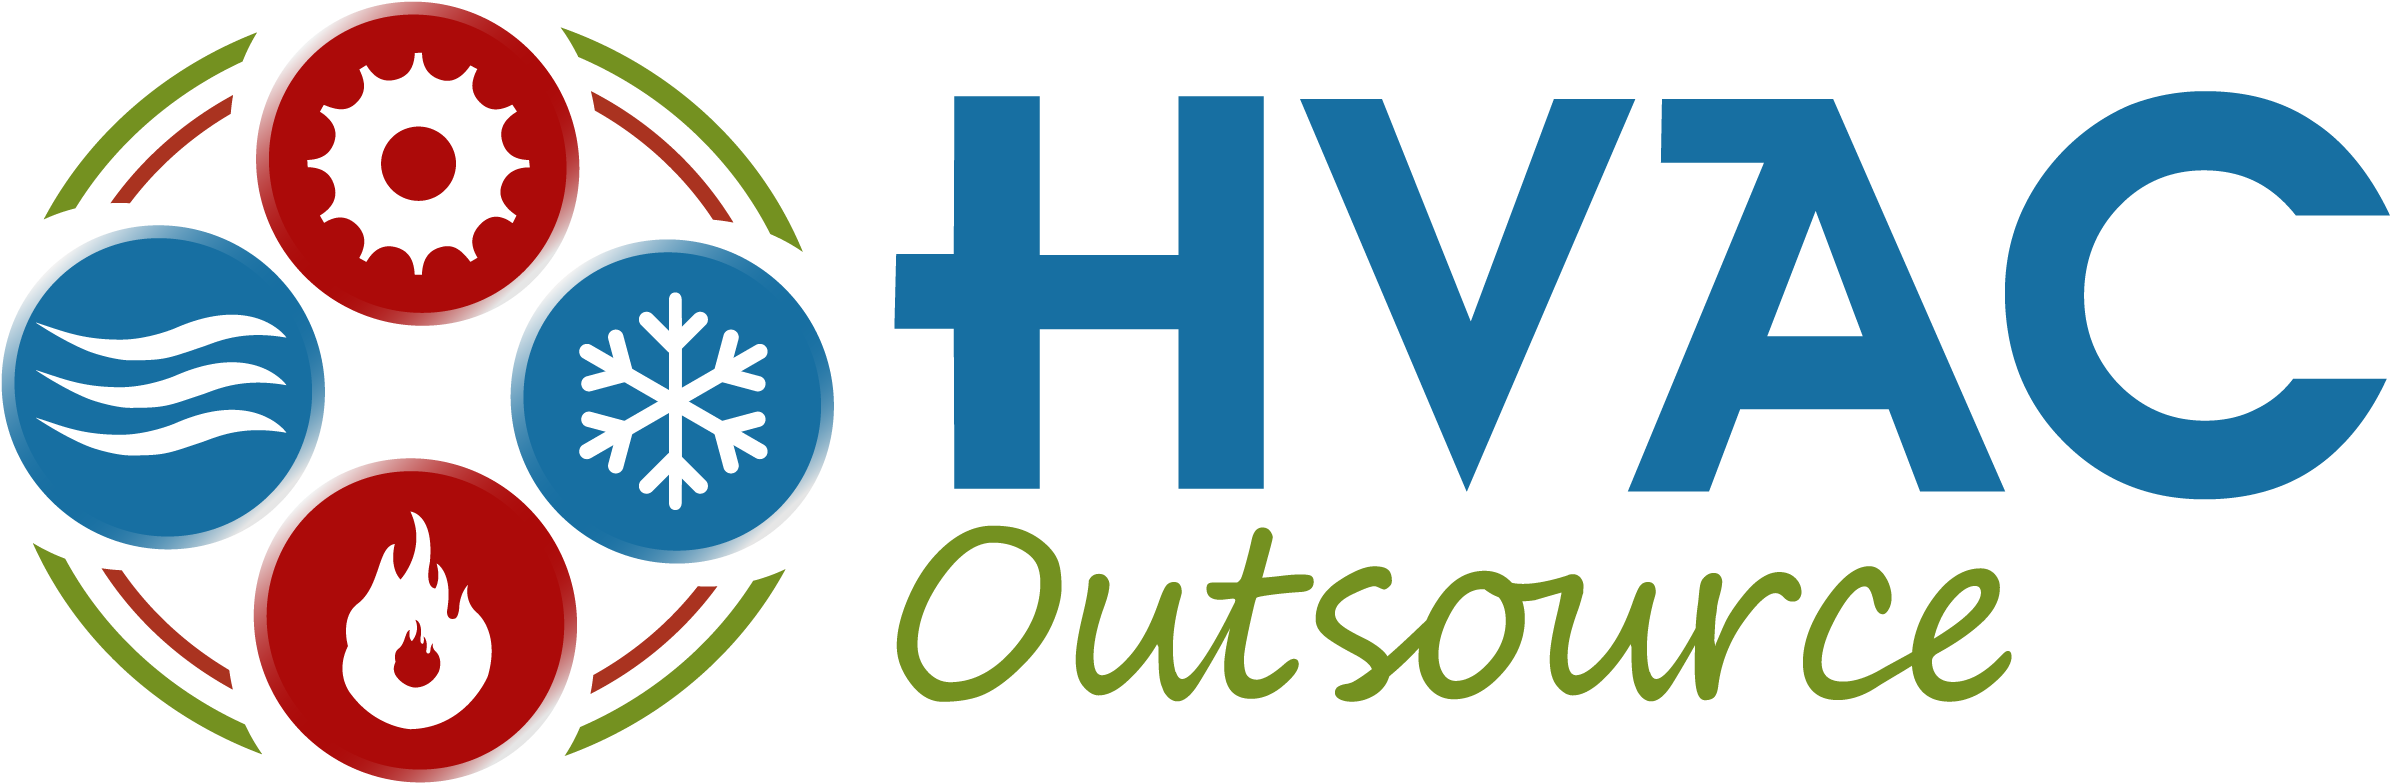 Hvac Outsource Is Your Neighbourhood Source For Reliable - Hvac Outsource Ltd (2667x958)